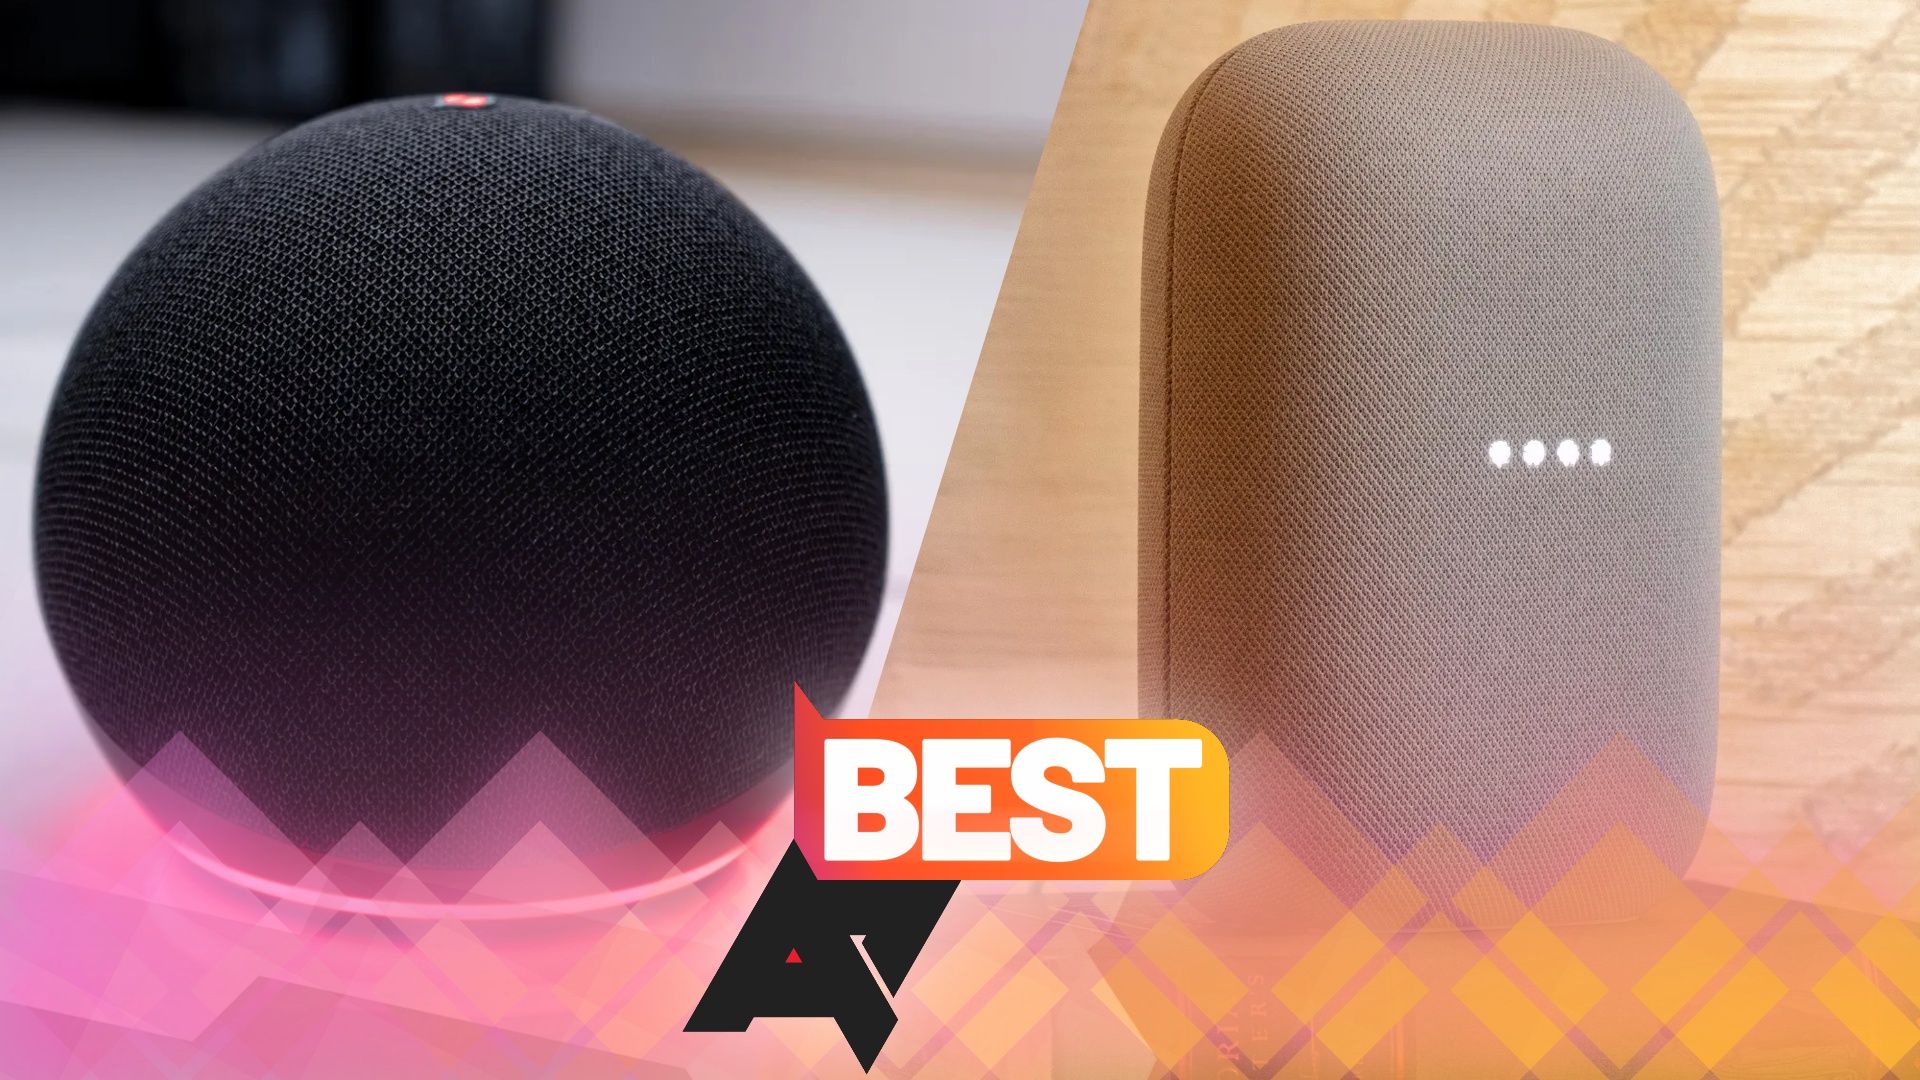 10 fun games you can play with your Google Assistant smart speaker